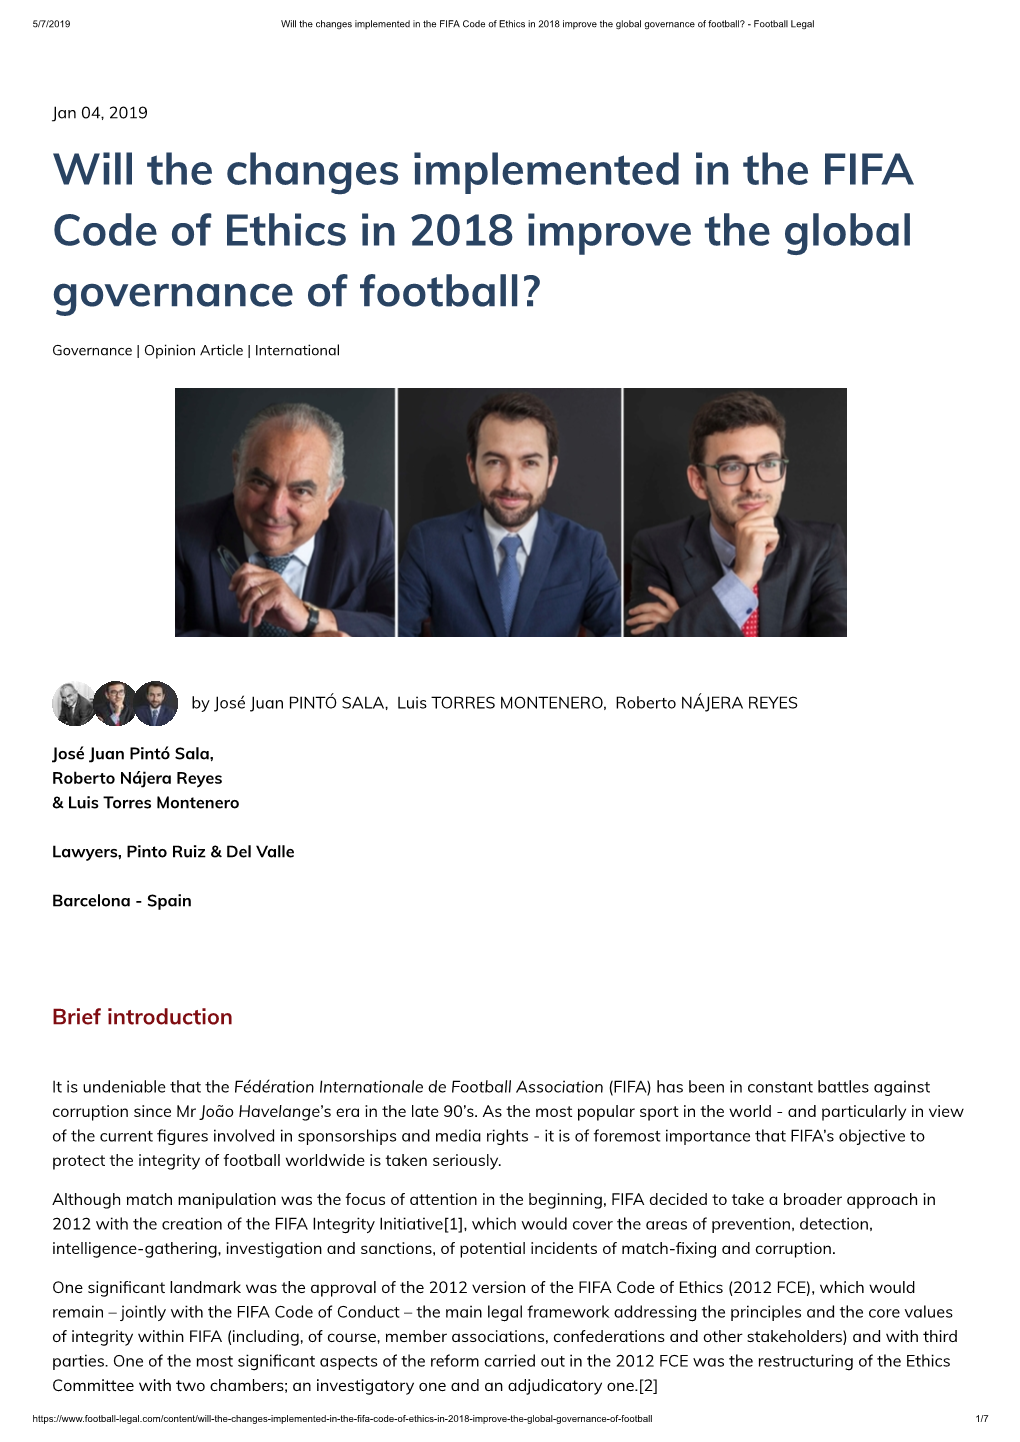 Will the Changes Implemented in the FIFA Code of Ethics in 2018 Improve the Global Governance of Football? - Football Legal